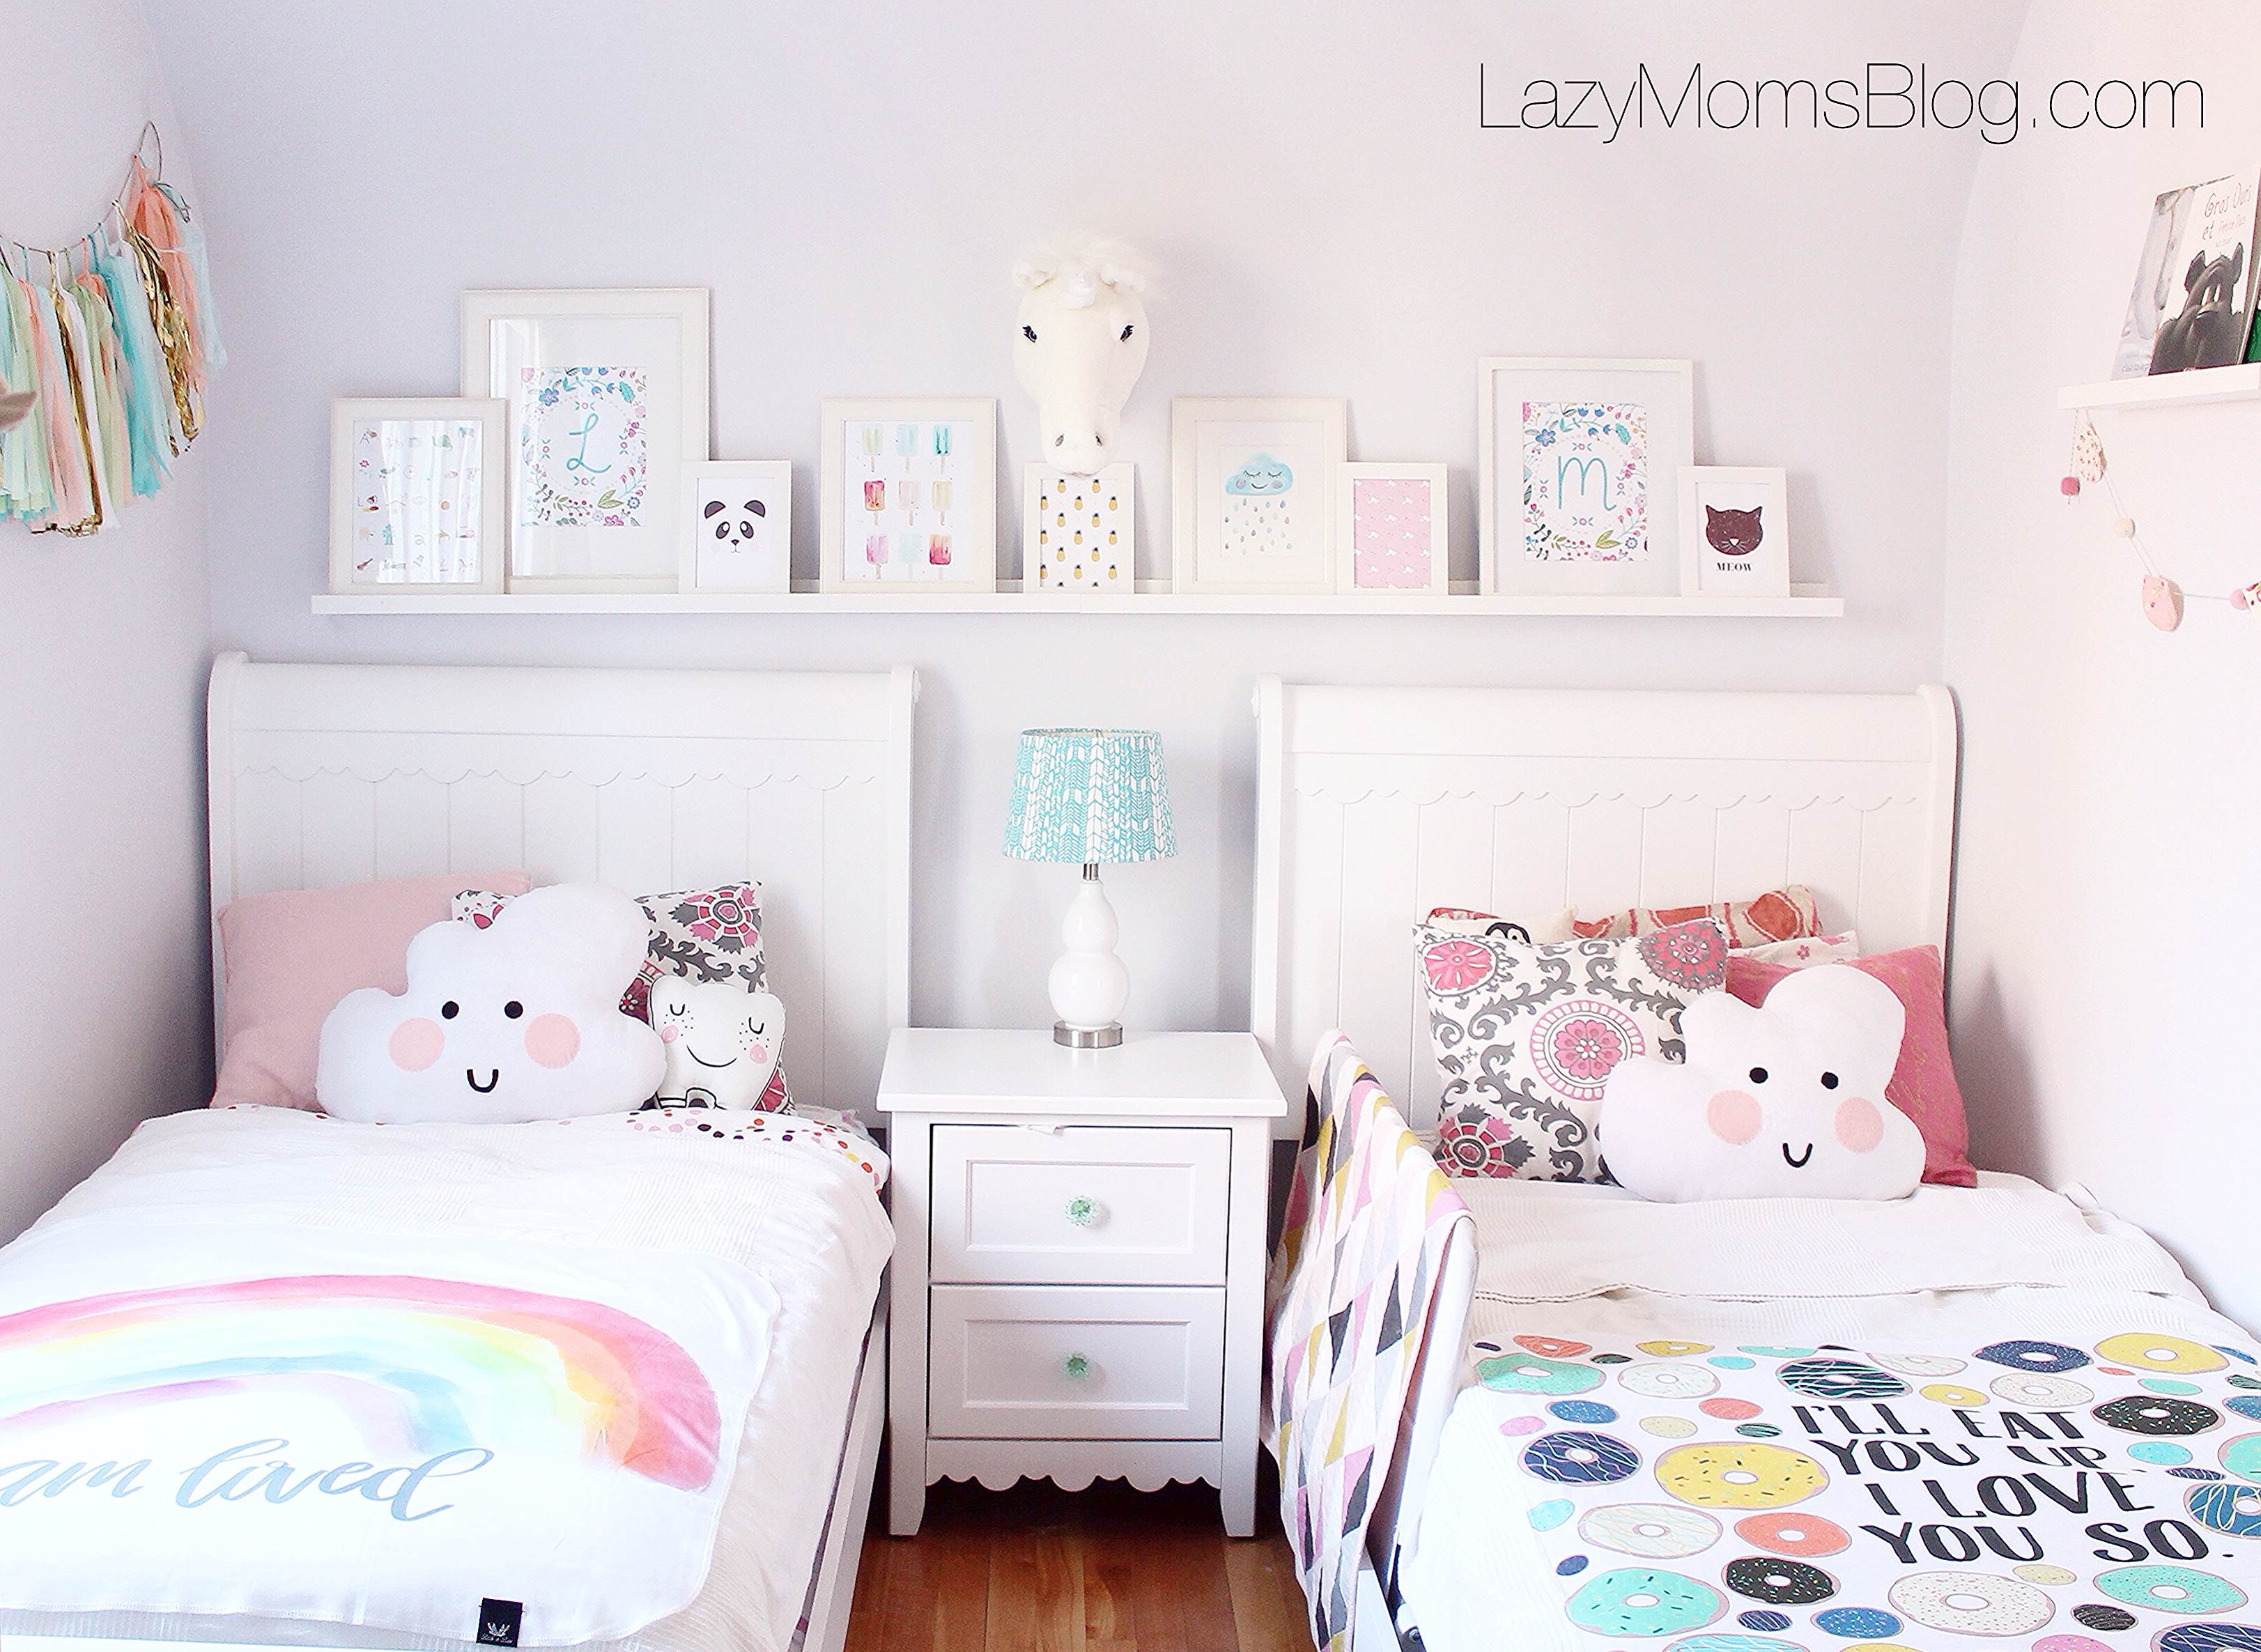 How to organize kid’s shared bedroom